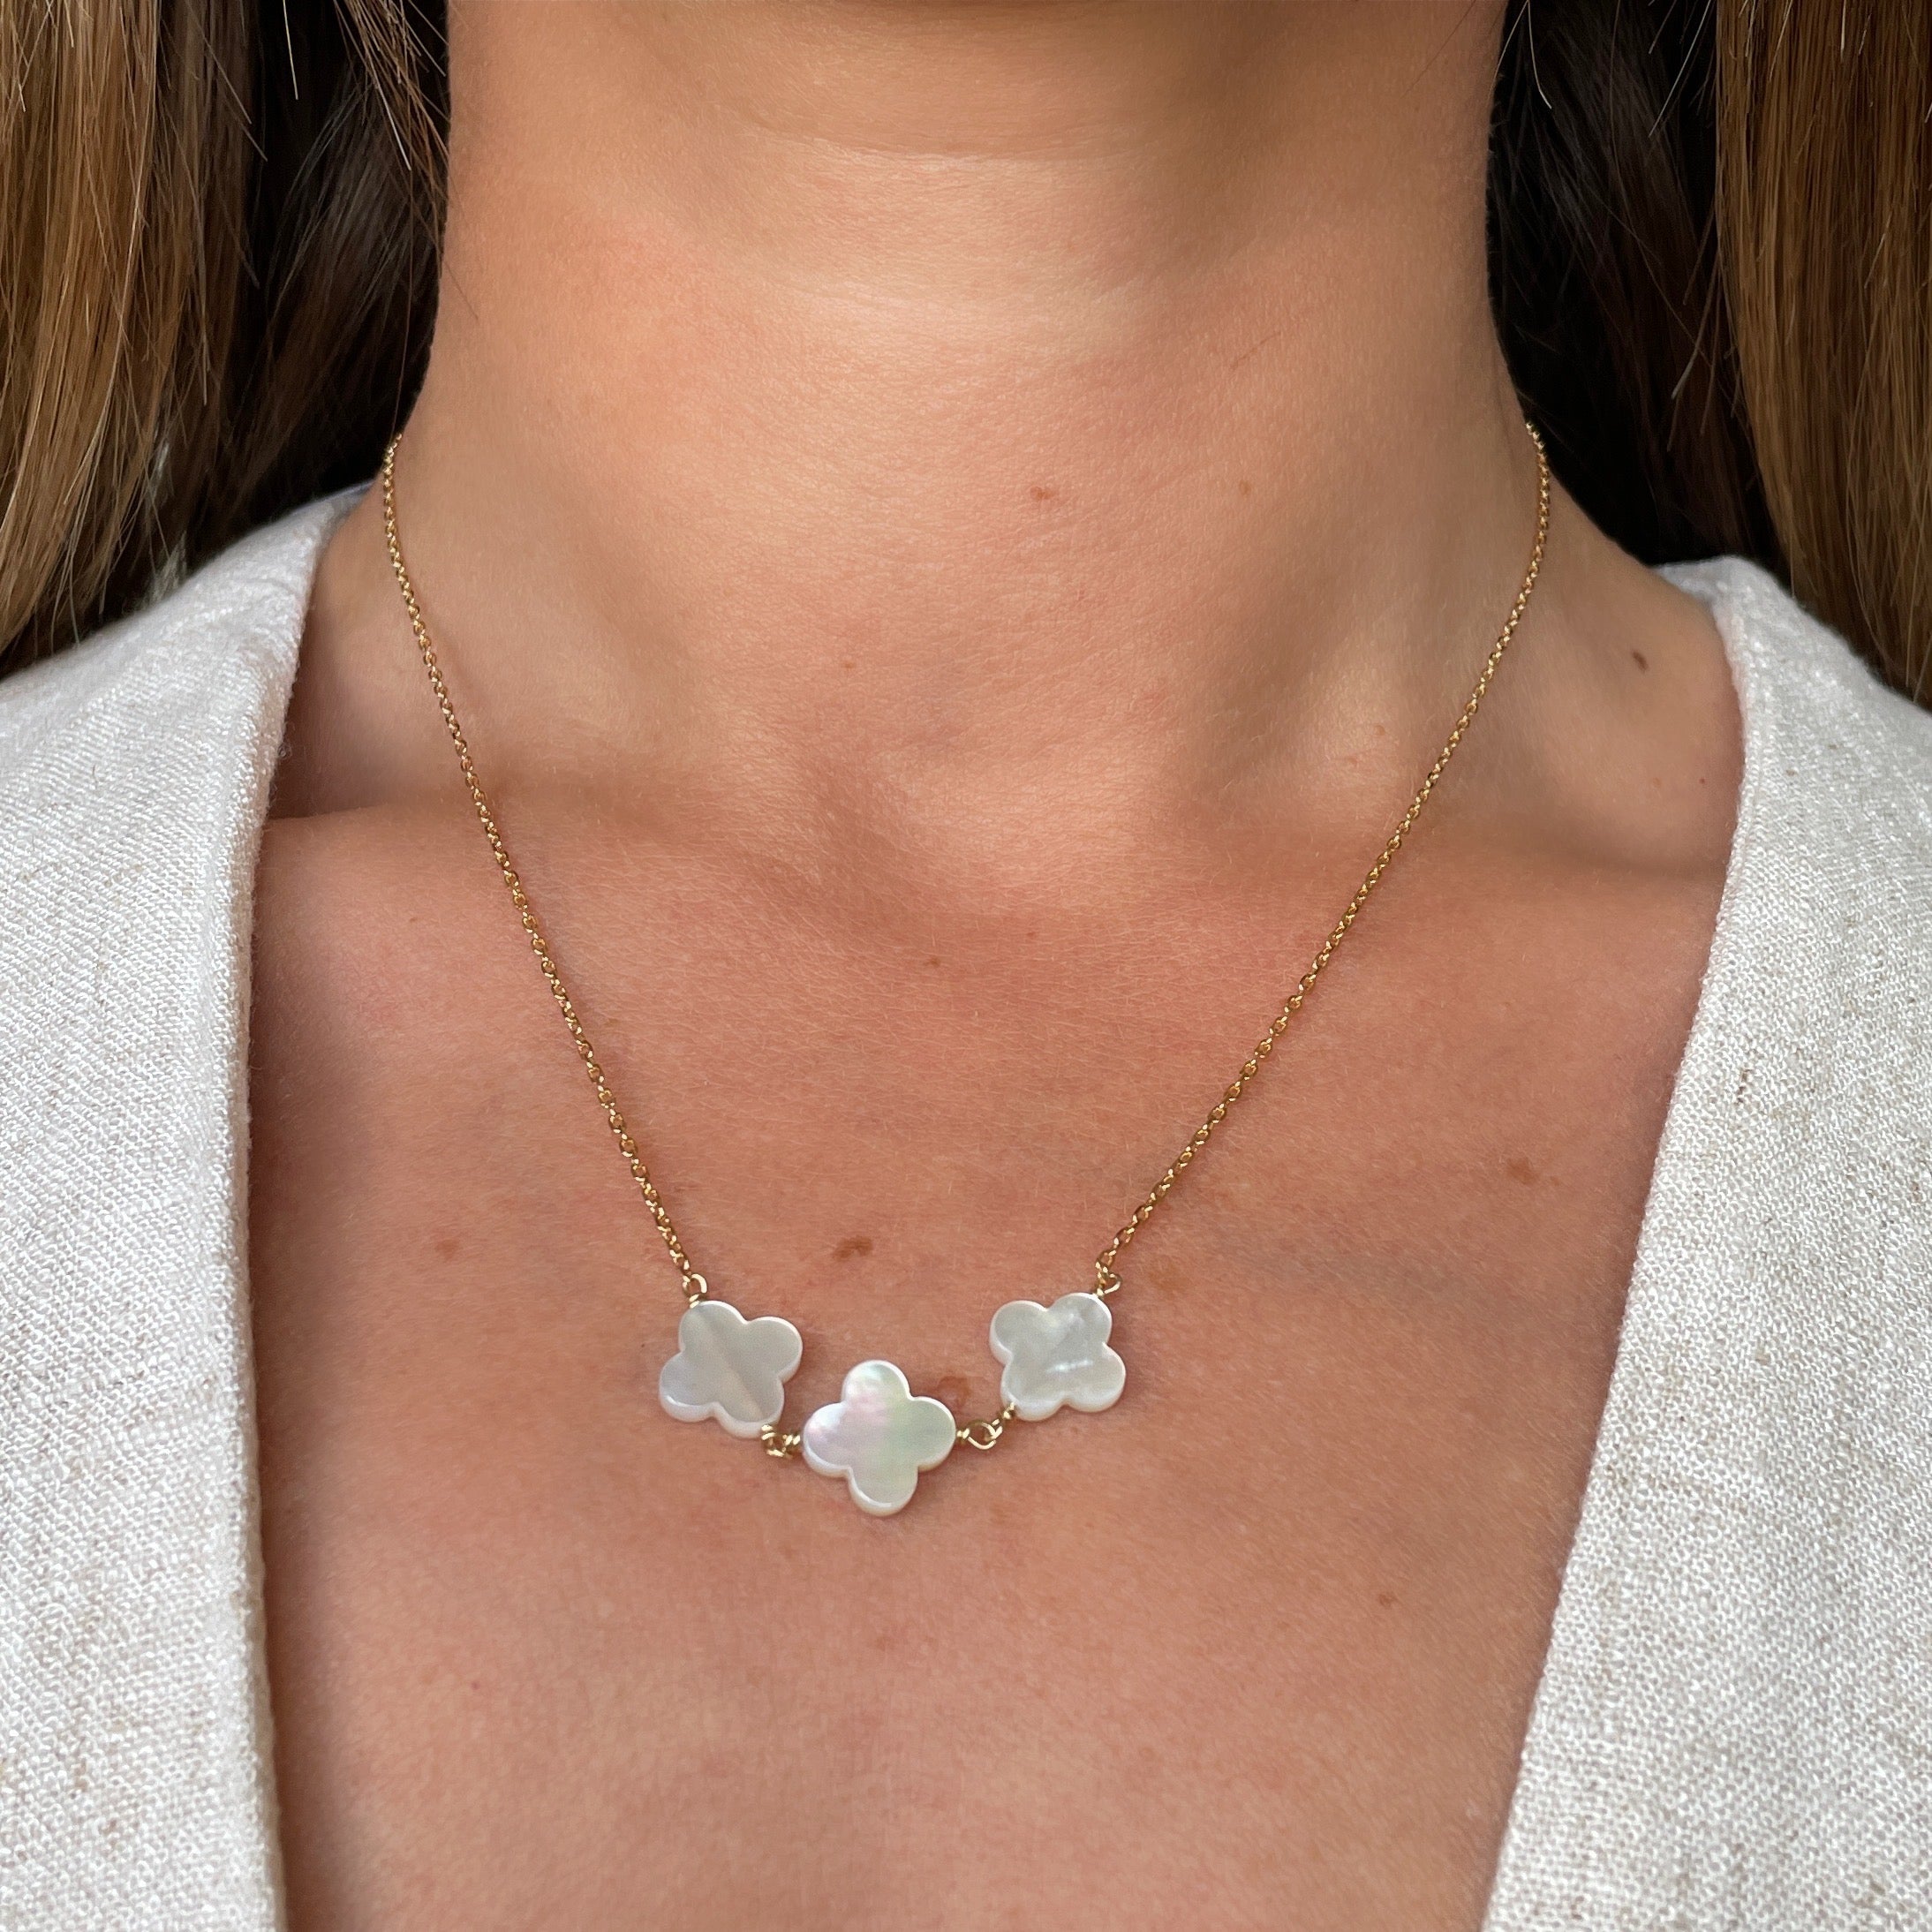 Gold-plated “3 mother-of-pearl clovers” necklace